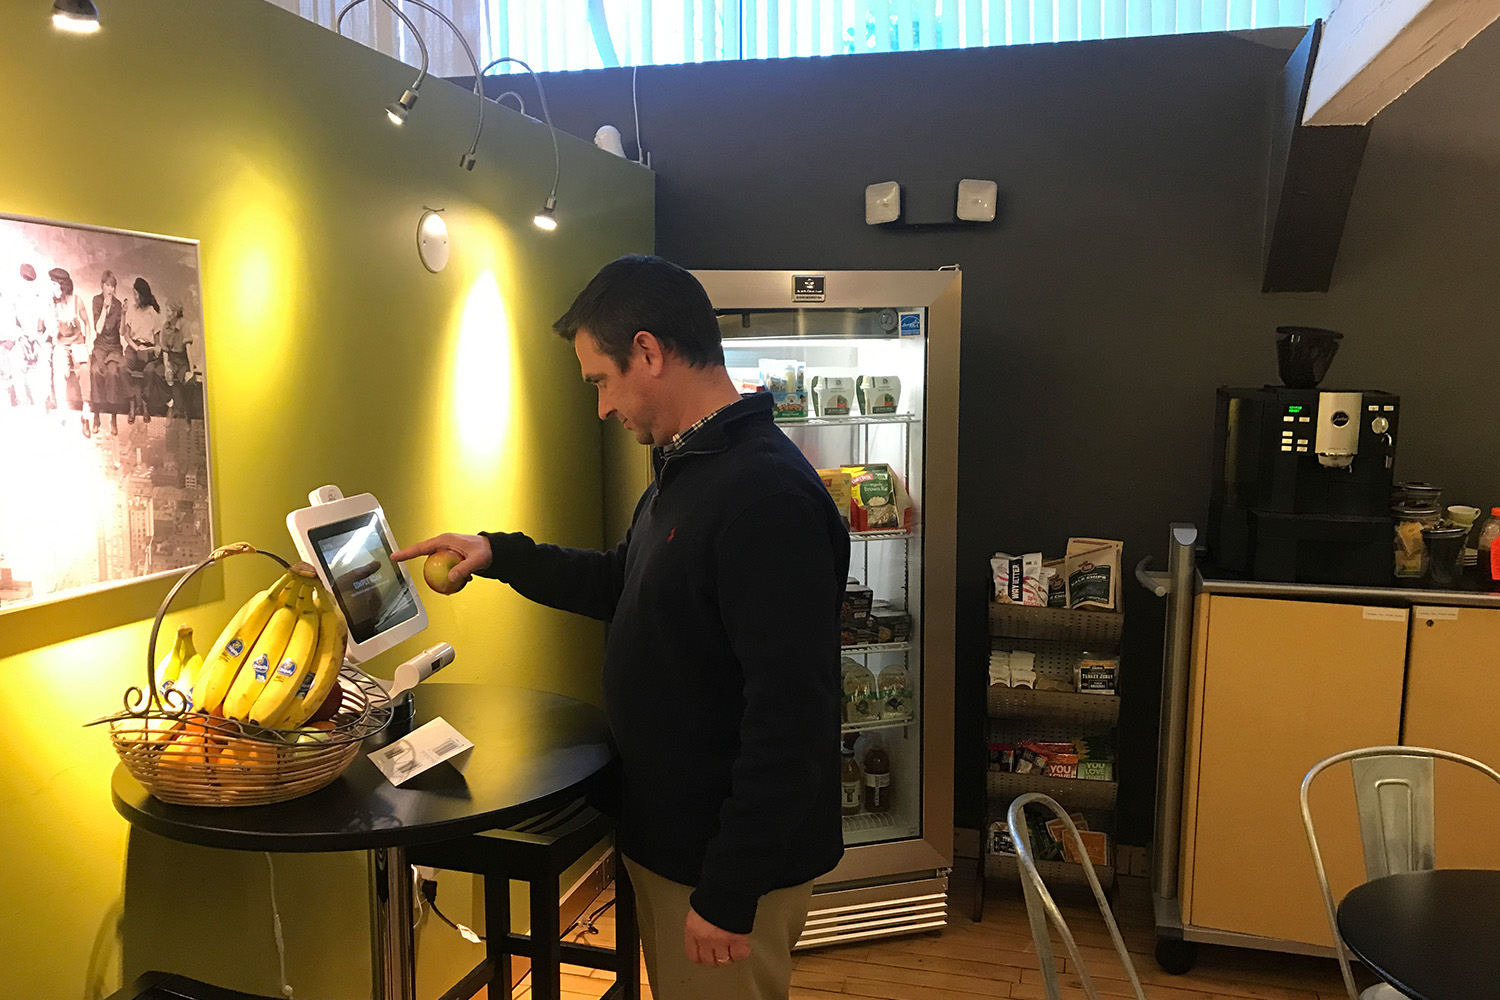 A Tocci staff member puts his information into a point-of-sale system to purchase lunch from the Berkbox console in the cafe.